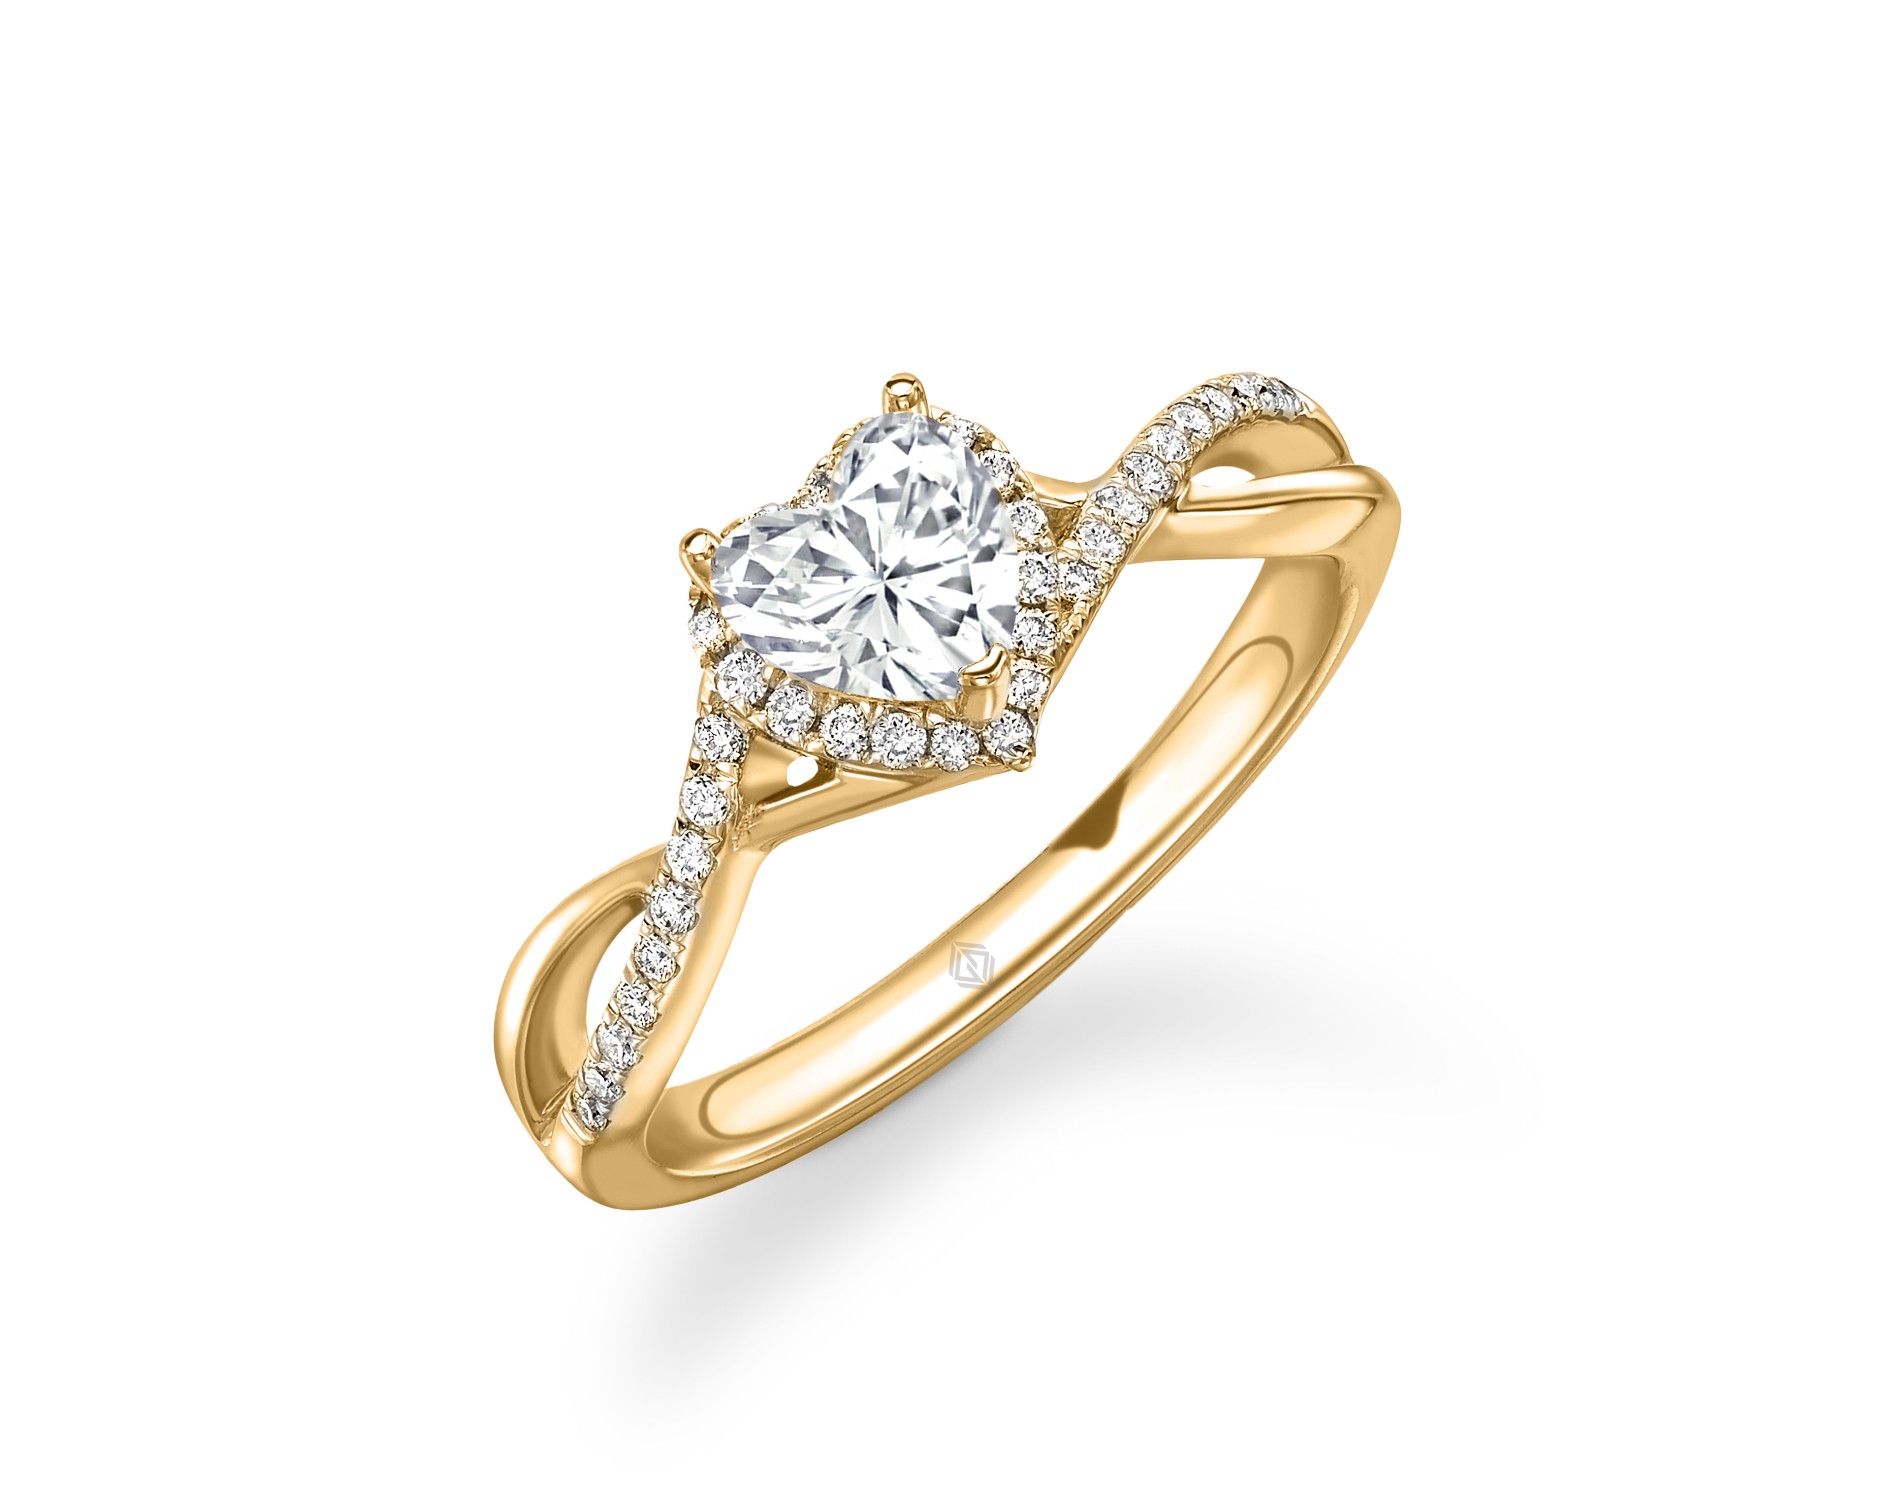 18K YELLOW GOLD HEART CUT HALO DIAMOND ENGAGEMENT RING WITH SIDE STONES IN TWISTED SHANK PAVE SET